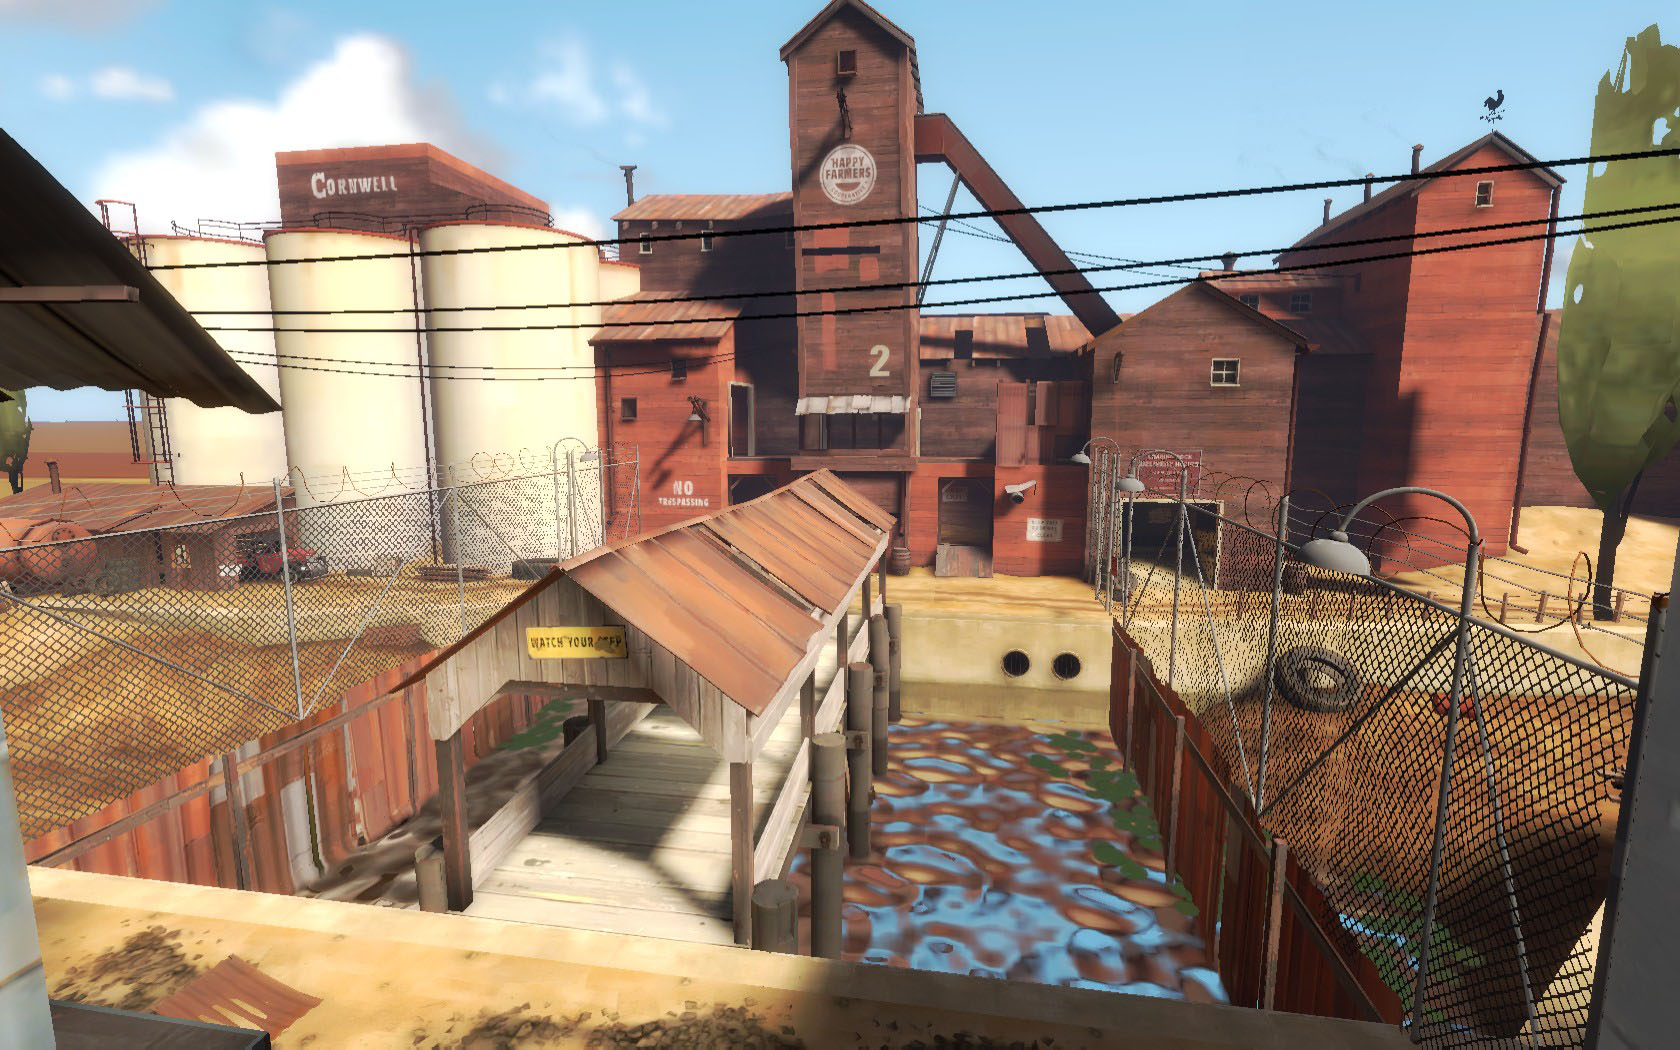 After a few more updates, this map will be EXACTLY like 2fort, except witho...